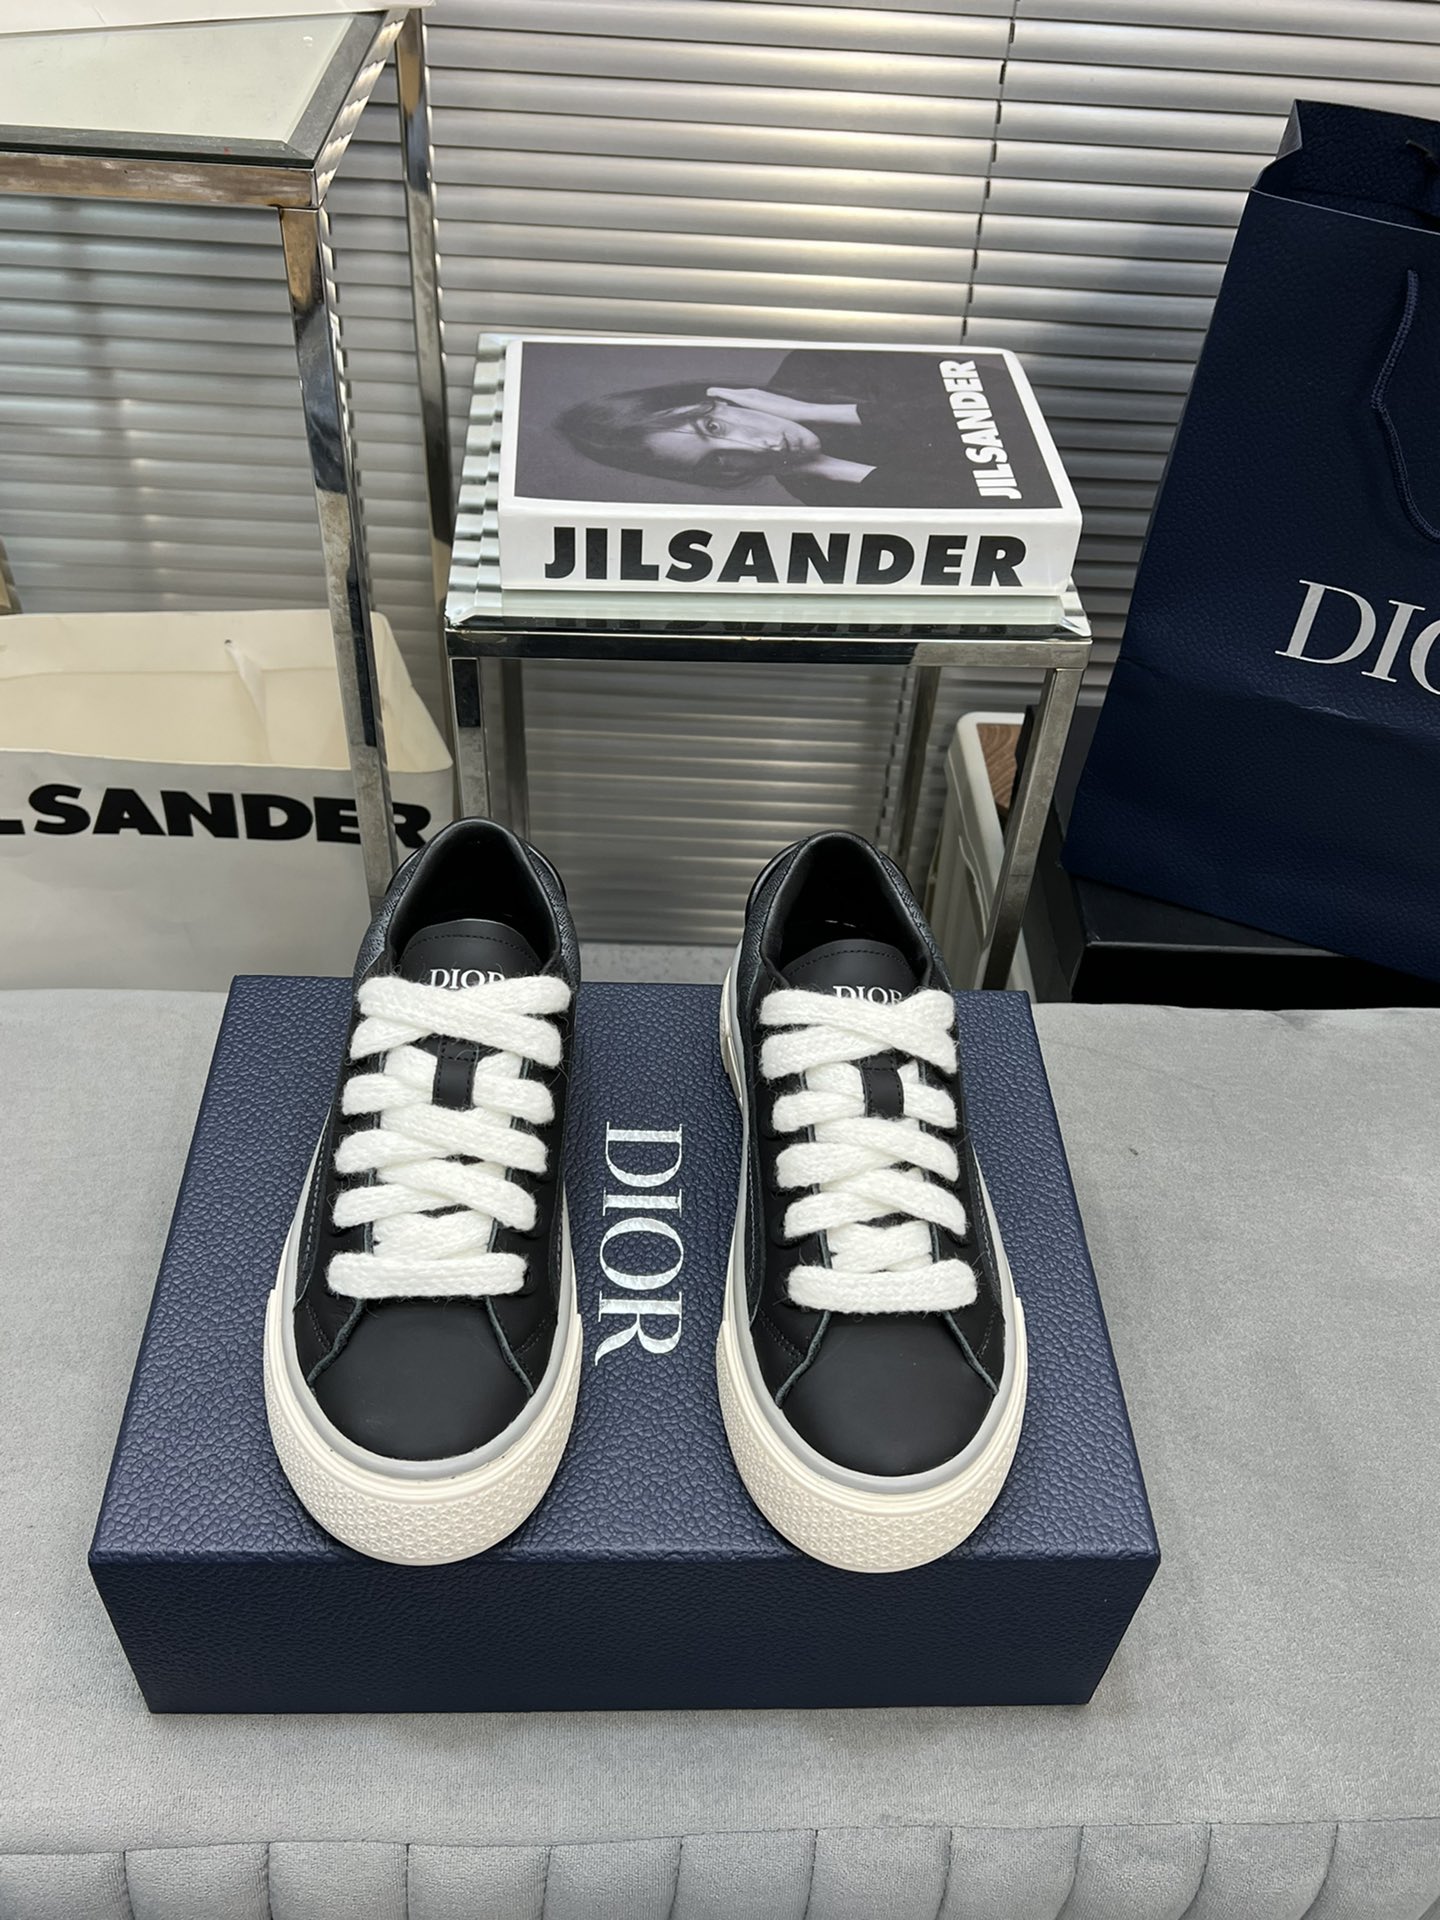 Dior Skateboard Shoes Sneakers Blue Navy White Yellow Printing Unisex Women Men Cowhide Denim Rubber Sheepskin TPU Fall Collection Oblique Casual